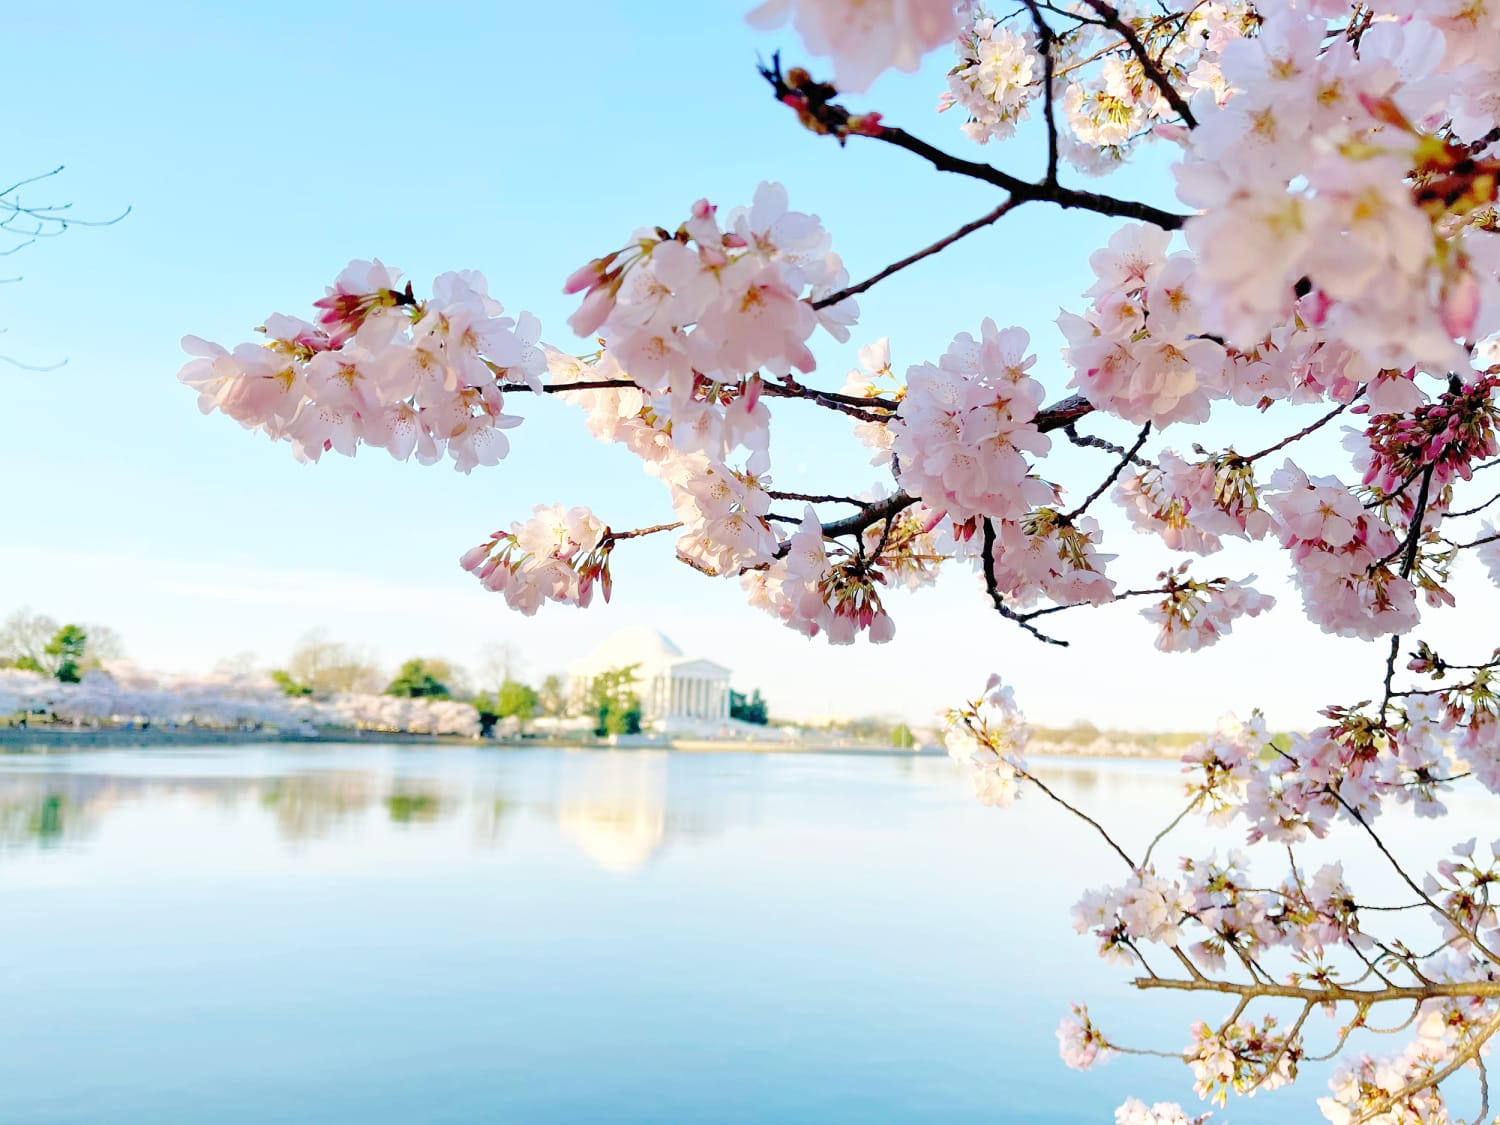 Blooming Seasons of Cherry Blossom Trees